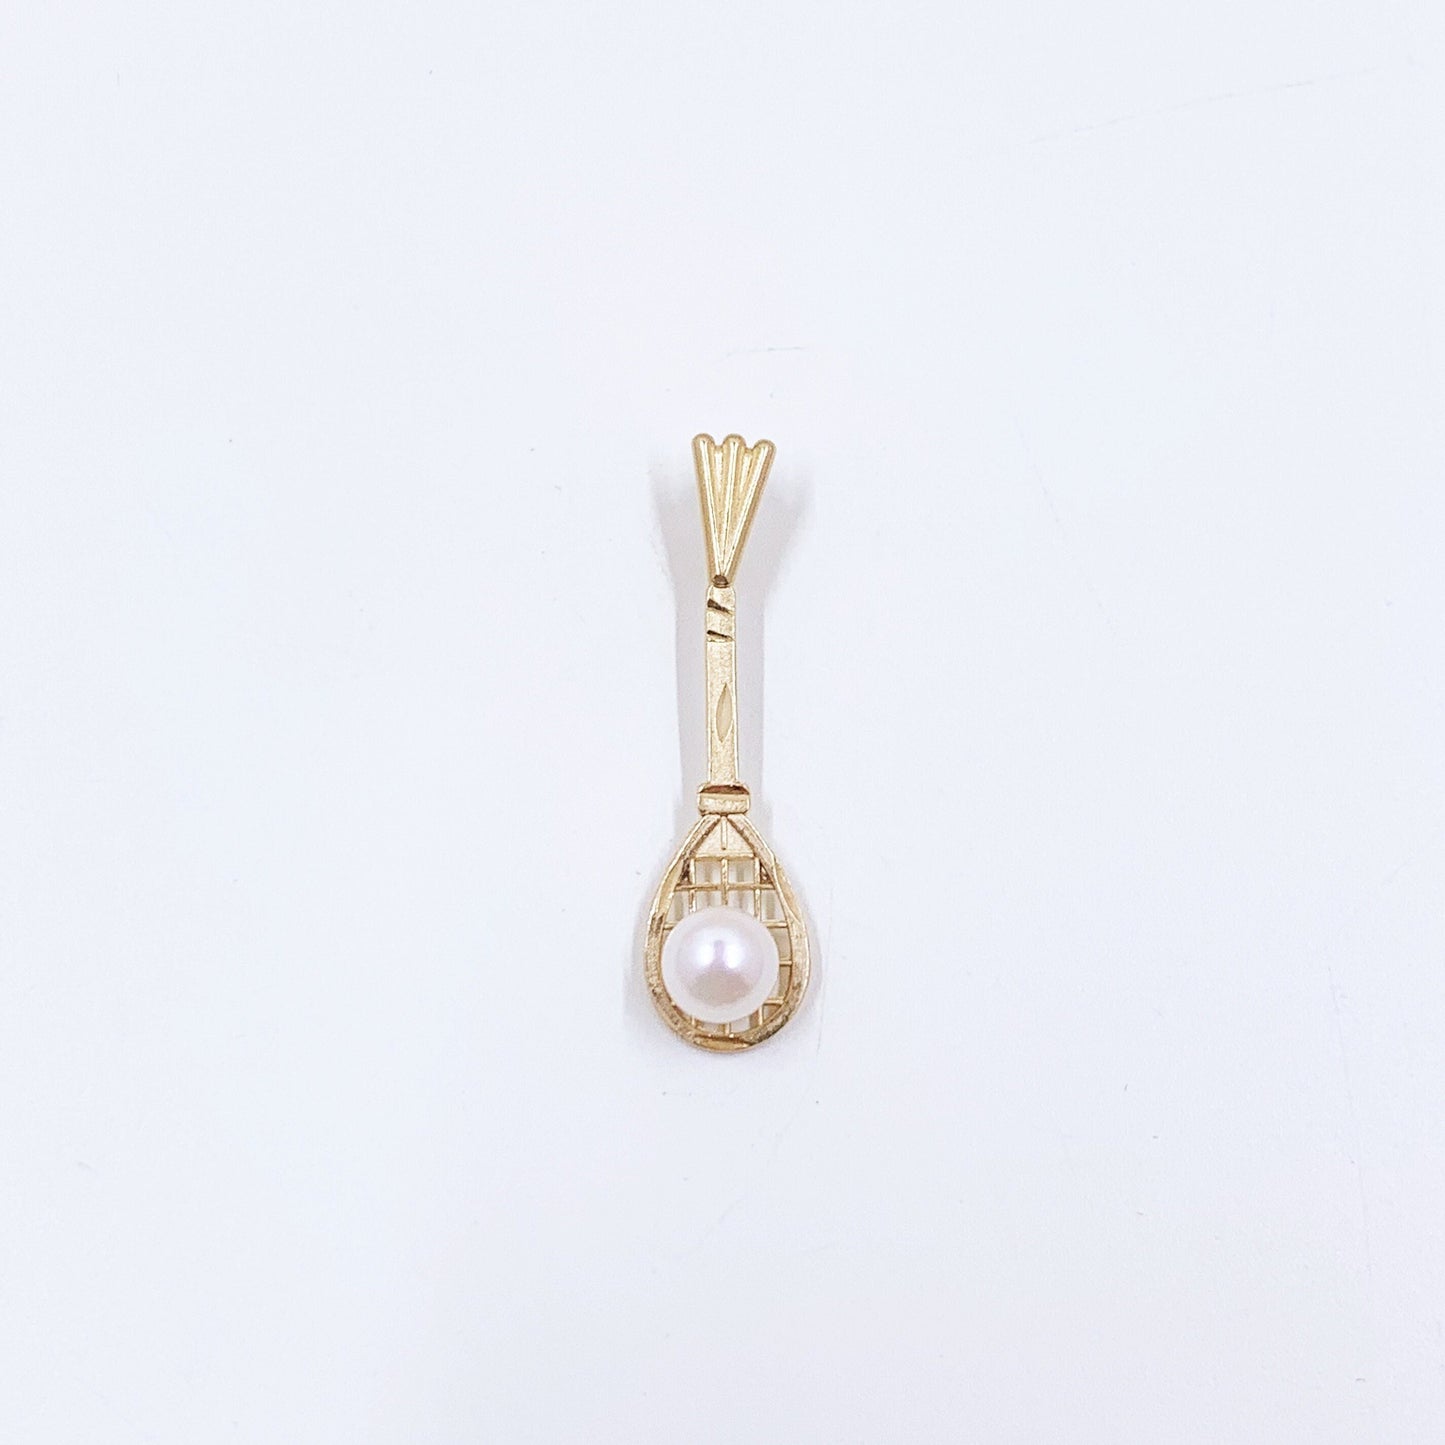 Vintage 14K Gold Tennis Racket Charm | 14k Michael Anthony Tennis Racket with Pearl Charm